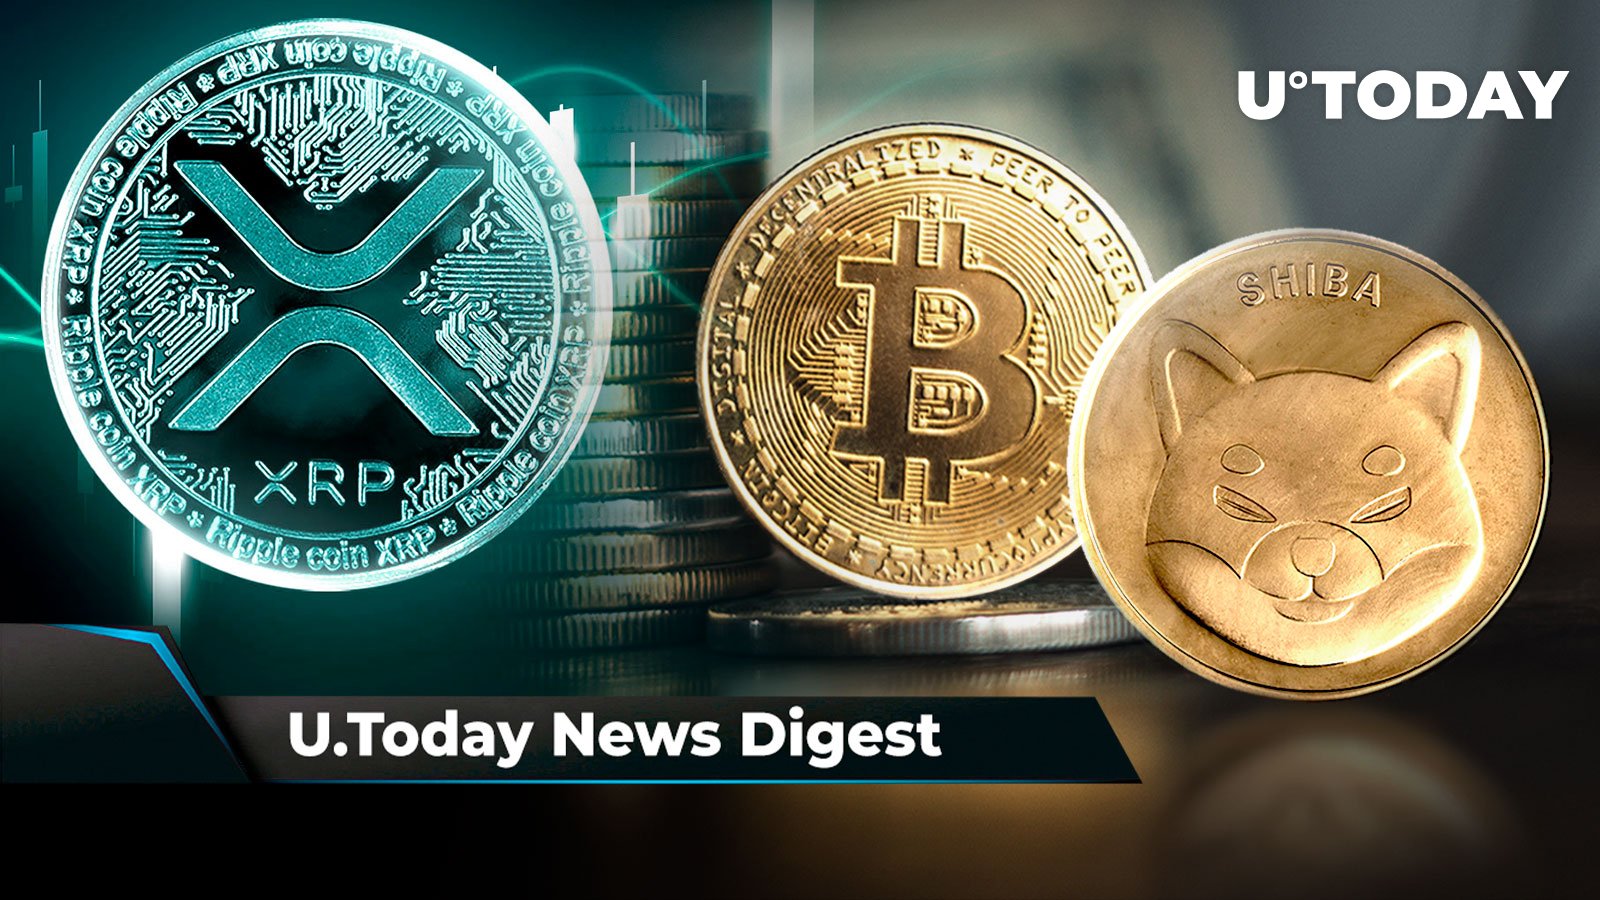 XRP Spikes 80% in Volume Amid Crypto Bloodbath, 461 Billion SHIB Moved to Robinhood Address, 17,000 BTC Exit Coinbase in Week’s Second Largest Outflow: Crypto News Digest by U.Today